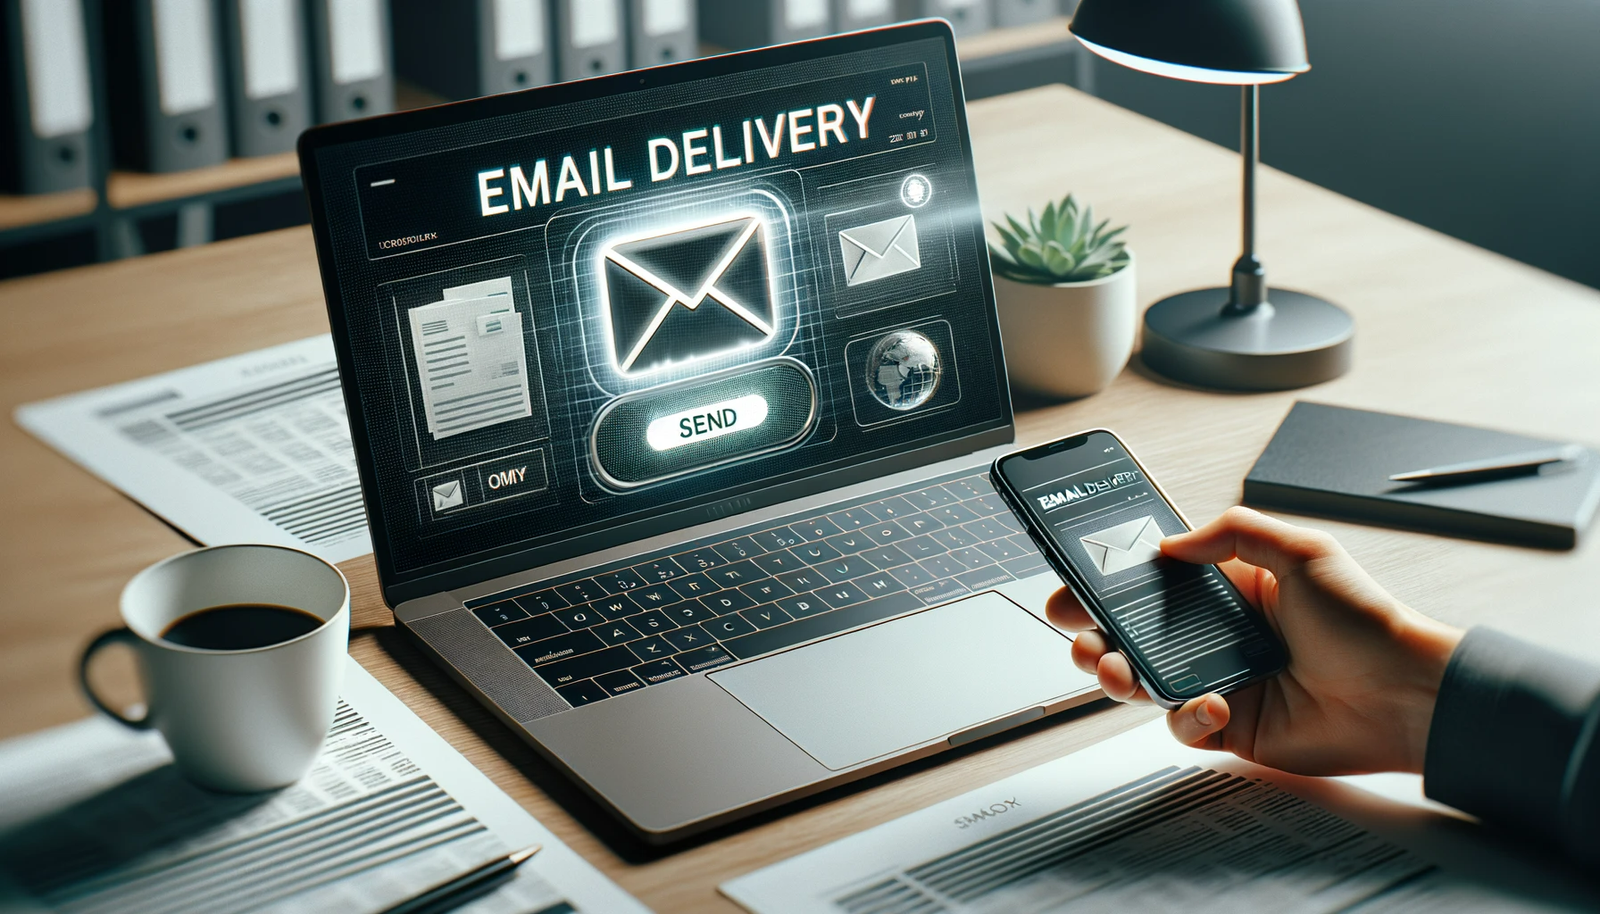 EmailDelivery Revolutionizing Inbox Experiences in the Digital Age